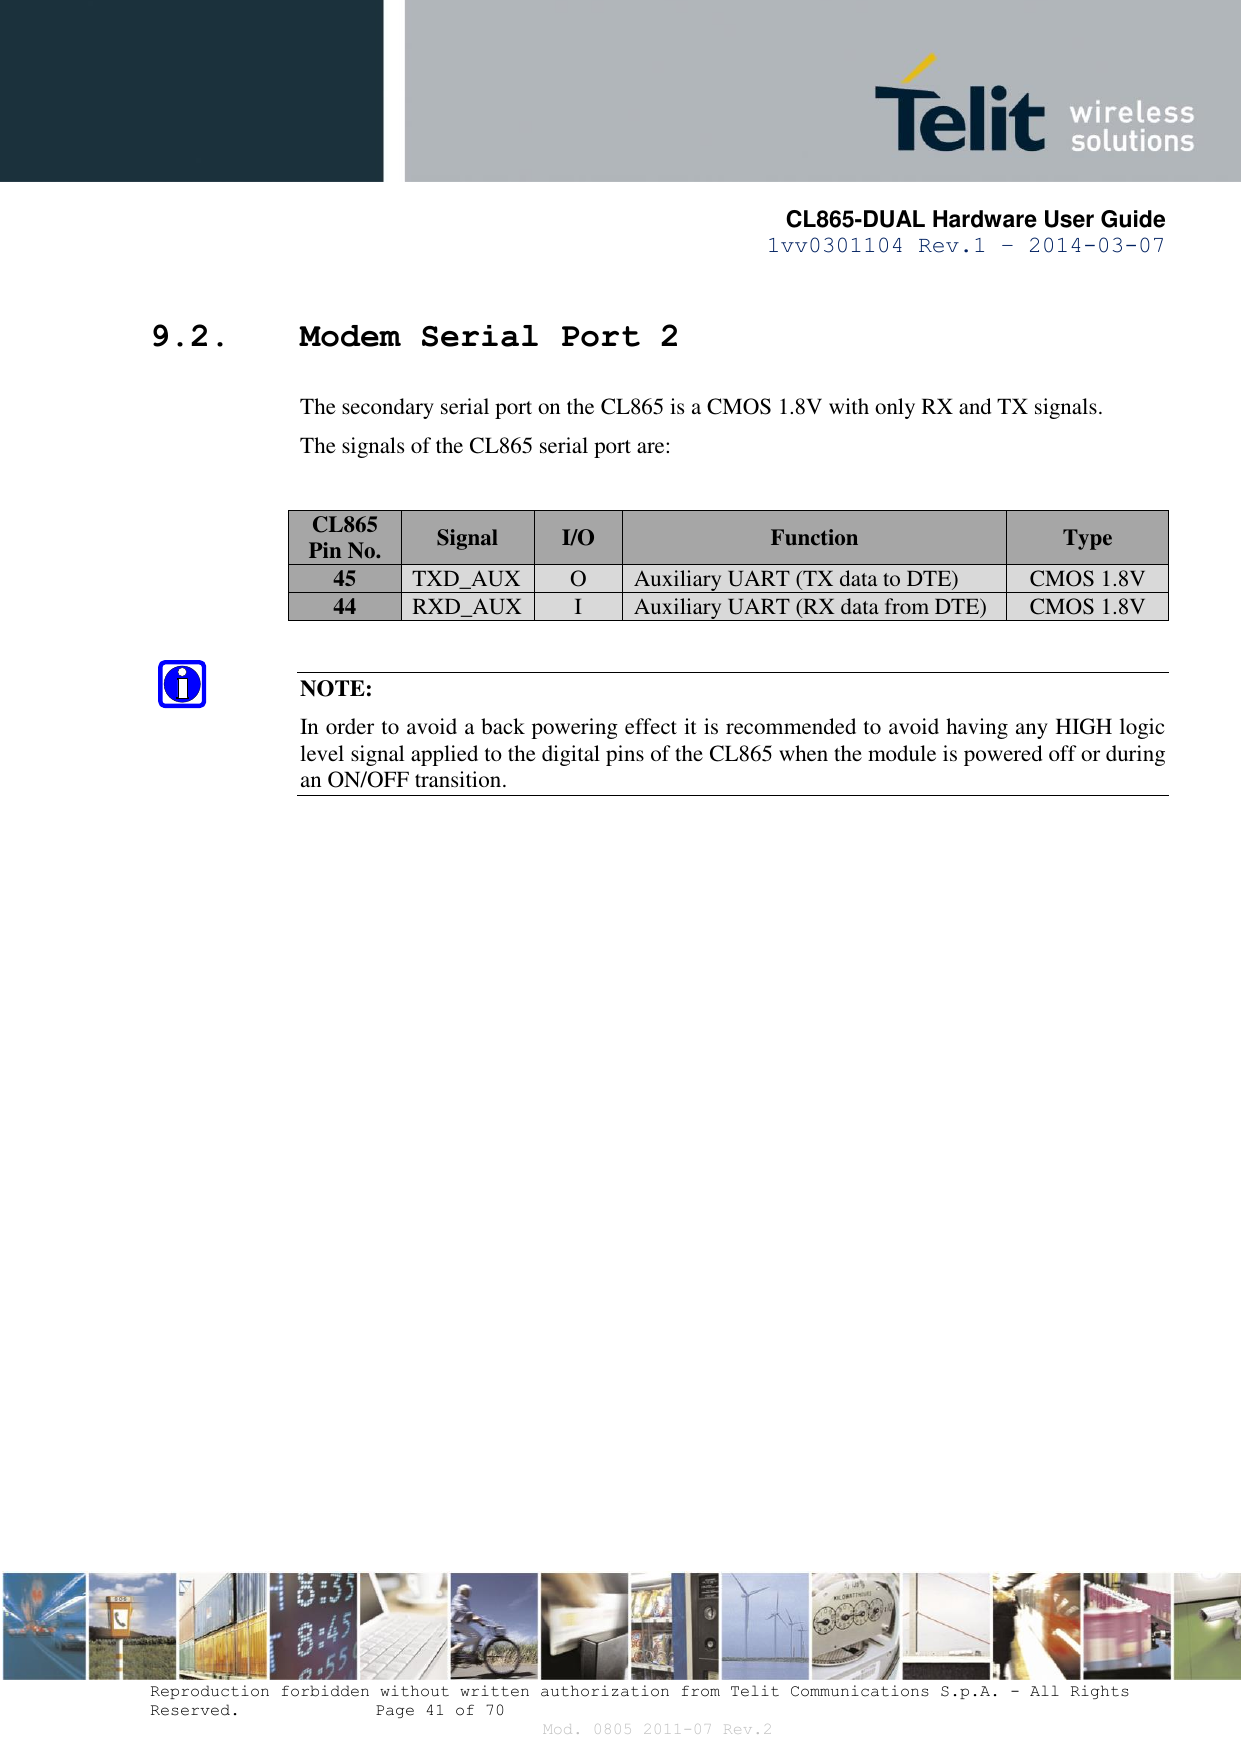       CL865-DUAL Hardware User Guide 1vv0301104 Rev.1 – 2014-03-07  Reproduction forbidden without written authorization from Telit Communications S.p.A. - All Rights Reserved.    Page 41 of 70 Mod. 0805 2011-07 Rev.2 9.2. Modem Serial Port 2 The secondary serial port on the CL865 is a CMOS 1.8V with only RX and TX signals. The signals of the CL865 serial port are:  CL865 Pin No. Signal I/O Function Type 45 TXD_AUX O Auxiliary UART (TX data to DTE) CMOS 1.8V 44 RXD_AUX I Auxiliary UART (RX data from DTE) CMOS 1.8V  NOTE: In order to avoid a back powering effect it is recommended to avoid having any HIGH logic level signal applied to the digital pins of the CL865 when the module is powered off or during an ON/OFF transition.                  